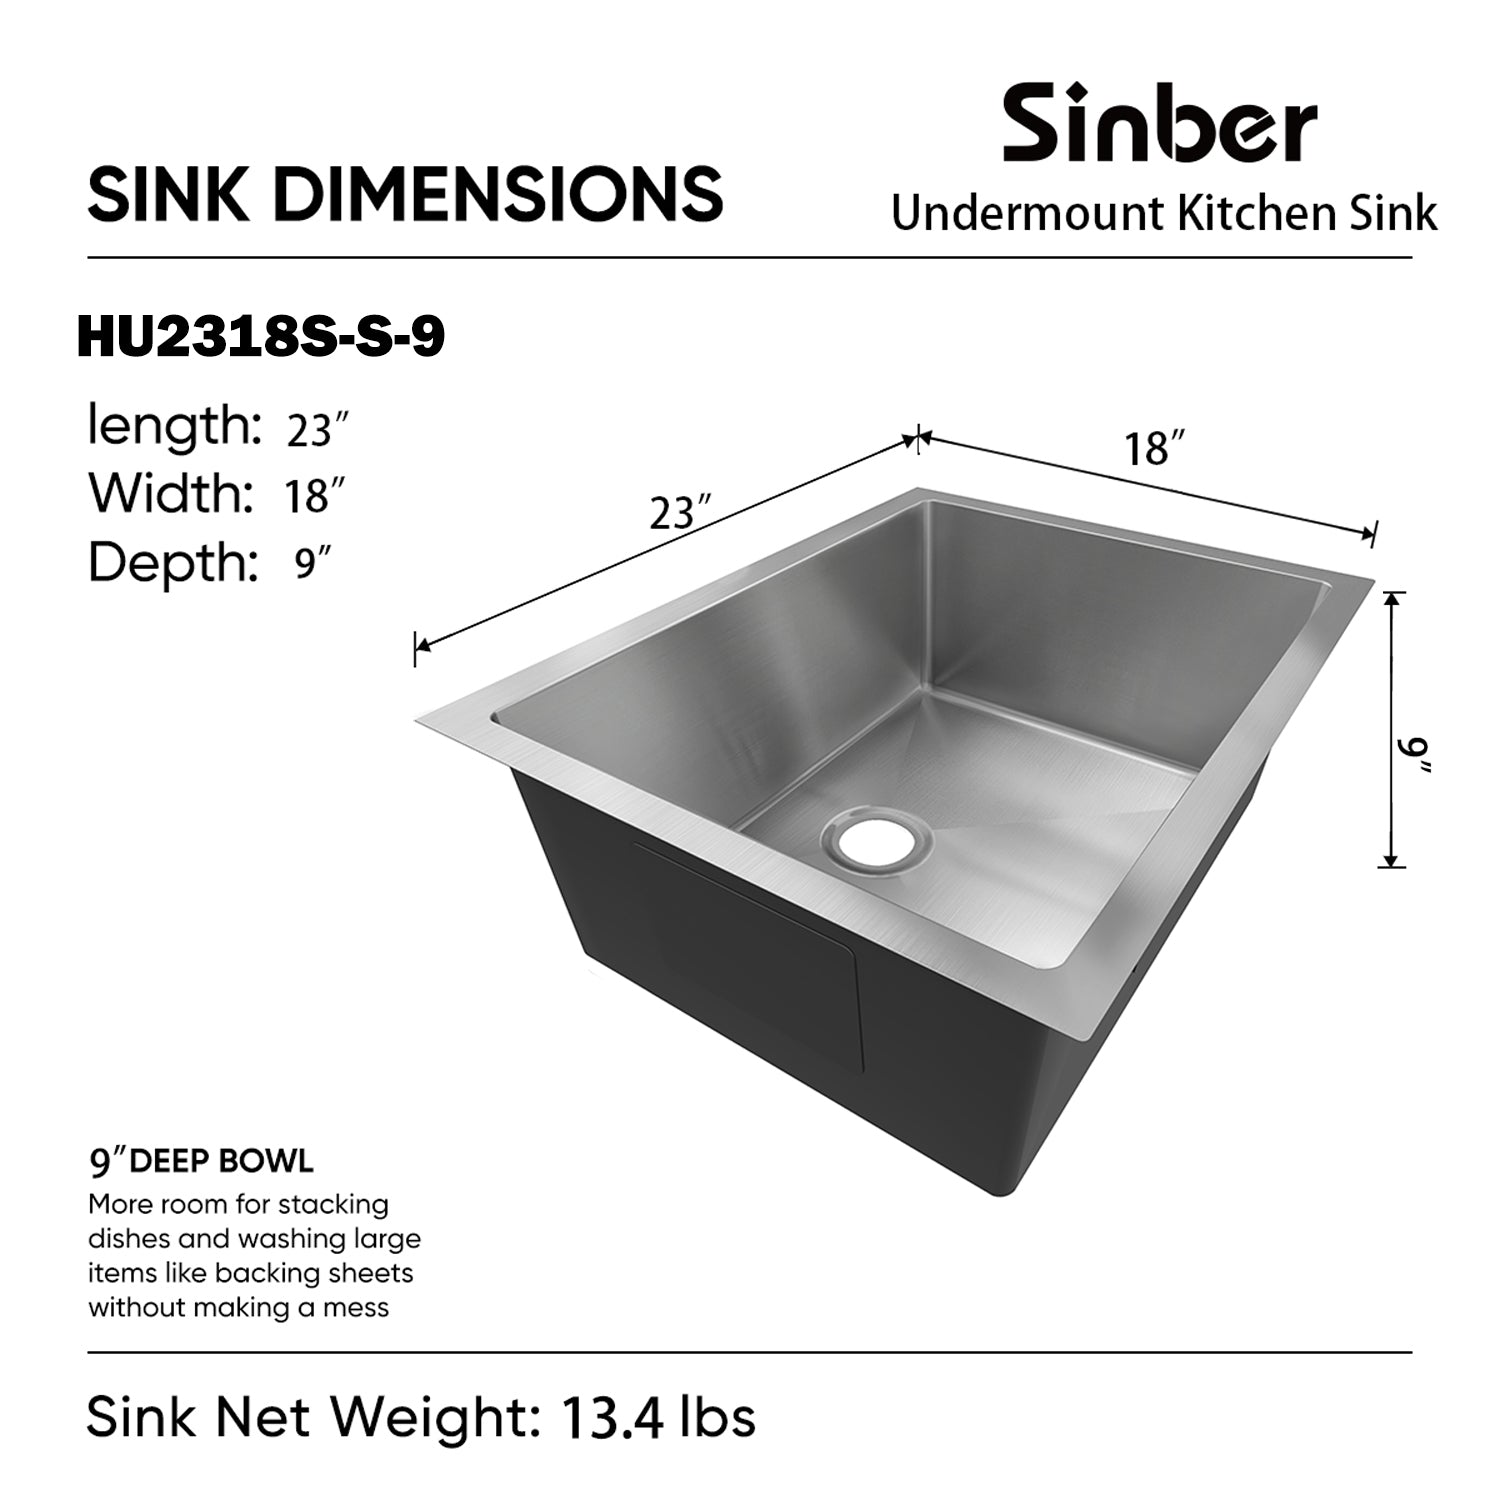 Sinber 23" x 18" x 9" Undermount Single Bowl Kitchen Sink with 18 Gauge 304 Stainless Steel Satin Finish HU2318S-S-9 (Sink Only)